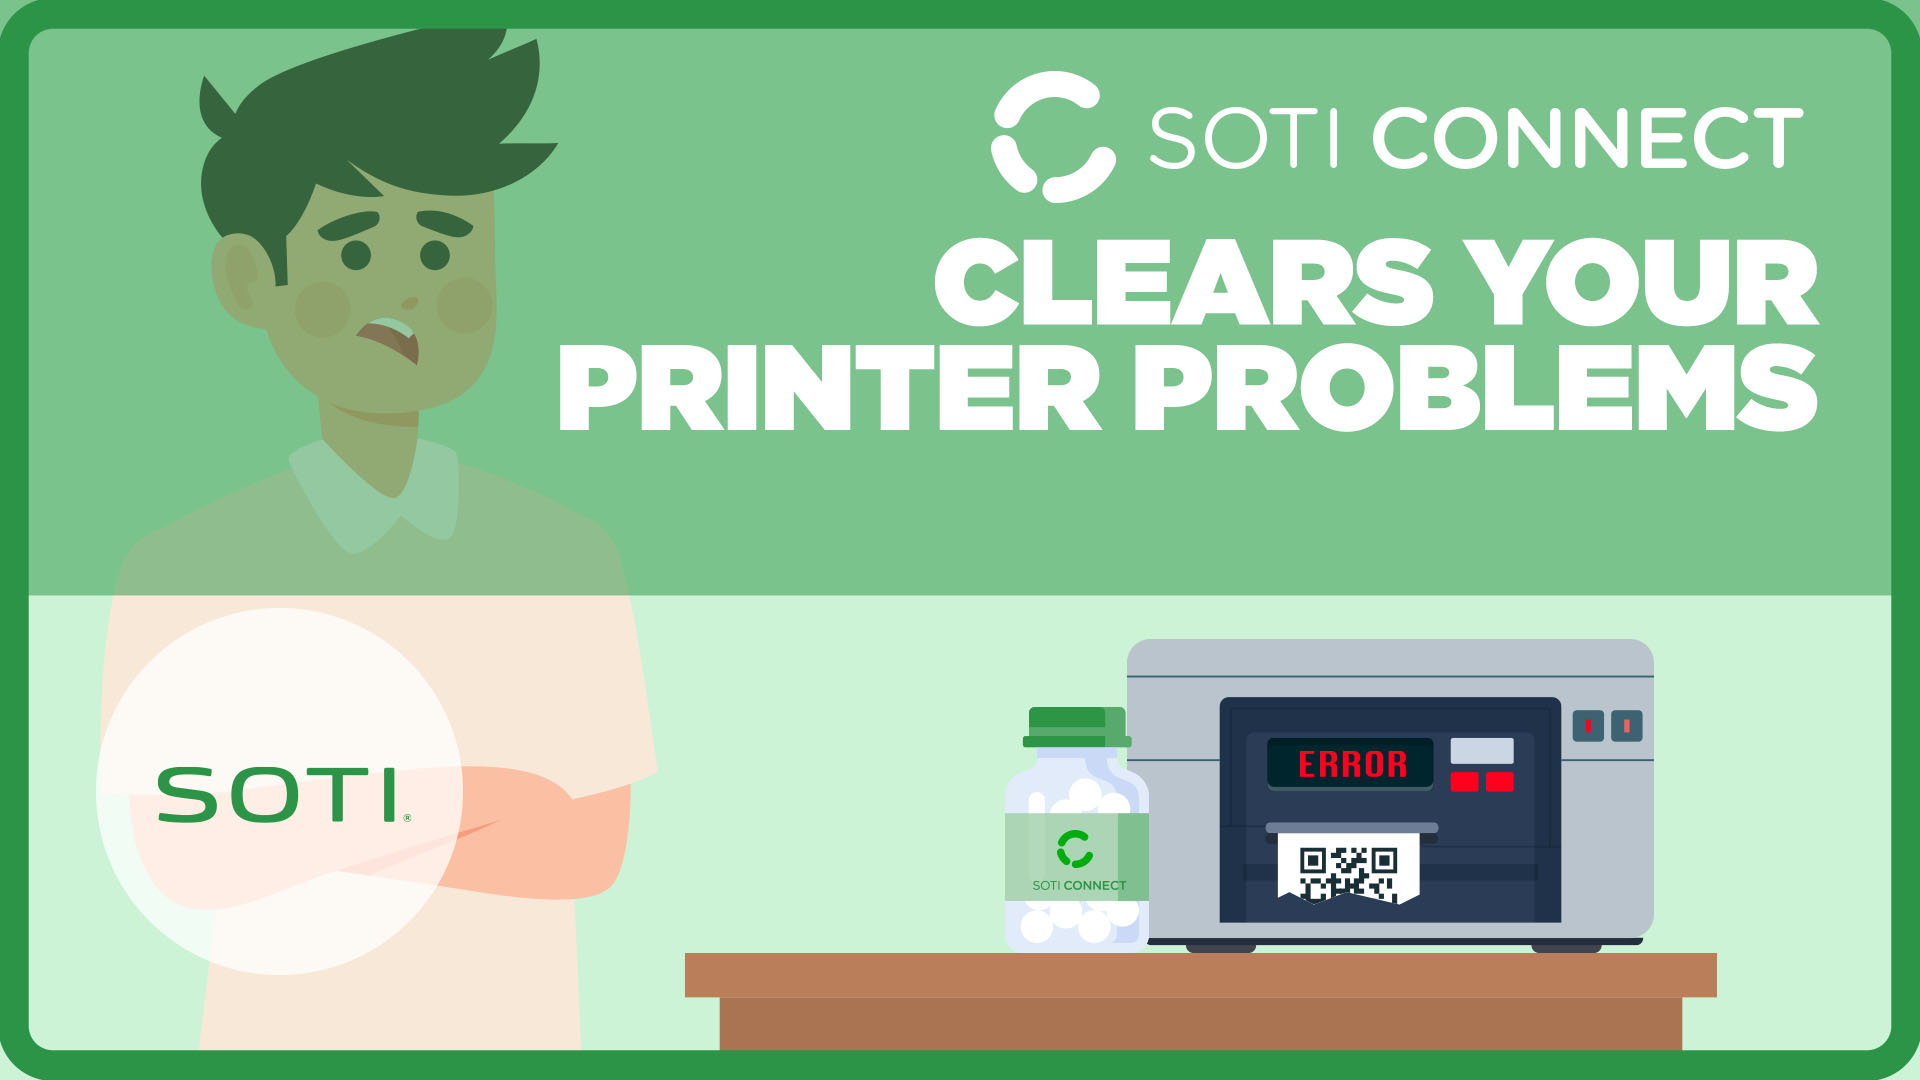 SOTI Connect Clears your Printer Problems Video